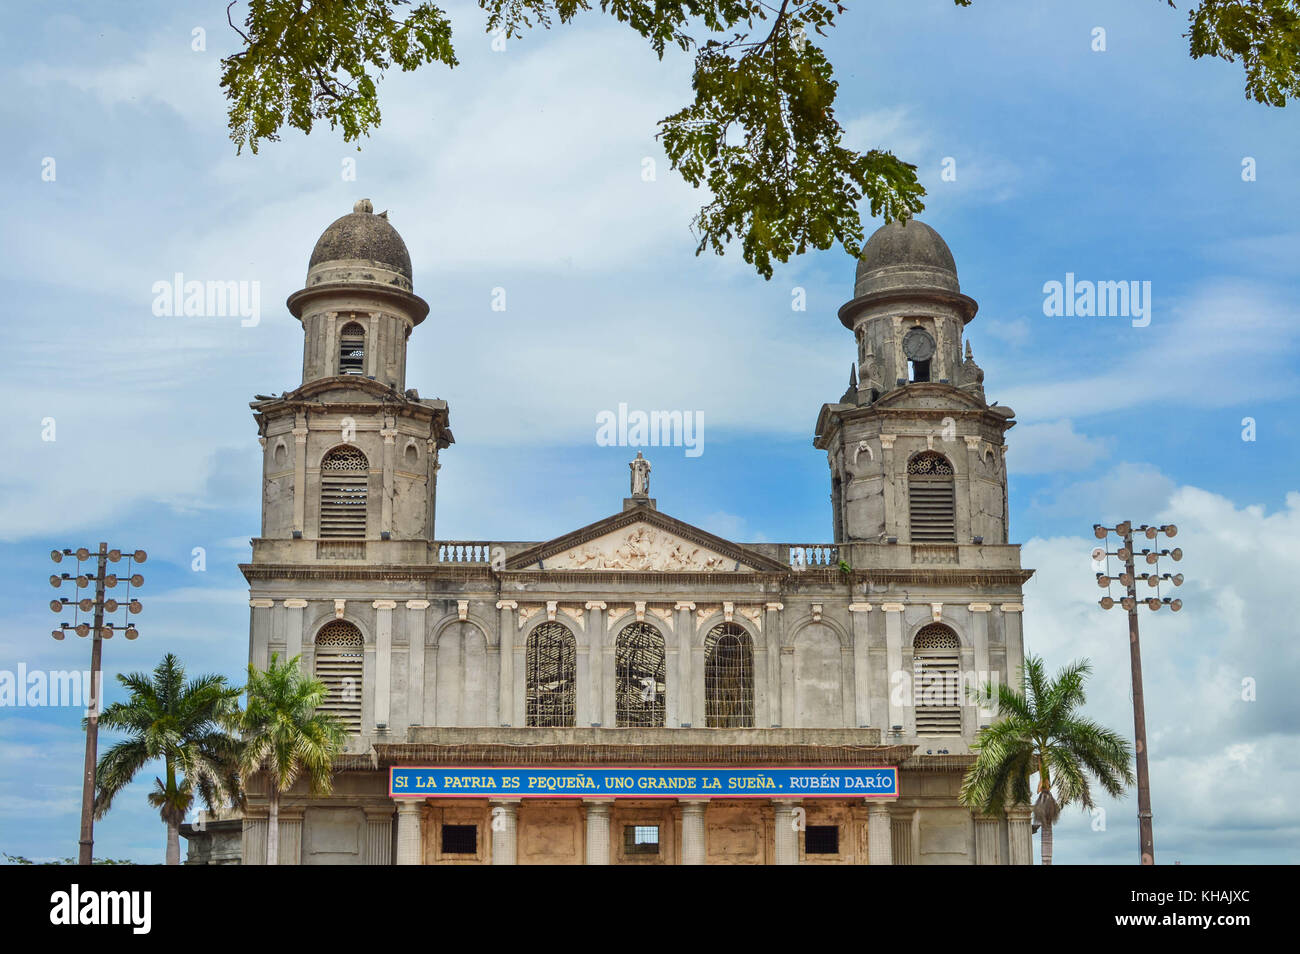 The old Cathedral of Managua, aka Catedral de Santiago, in Managua, Nicaragua. The sign in Spanish quotes Ruben Dario “If the homeland is small, one d Stock Photo